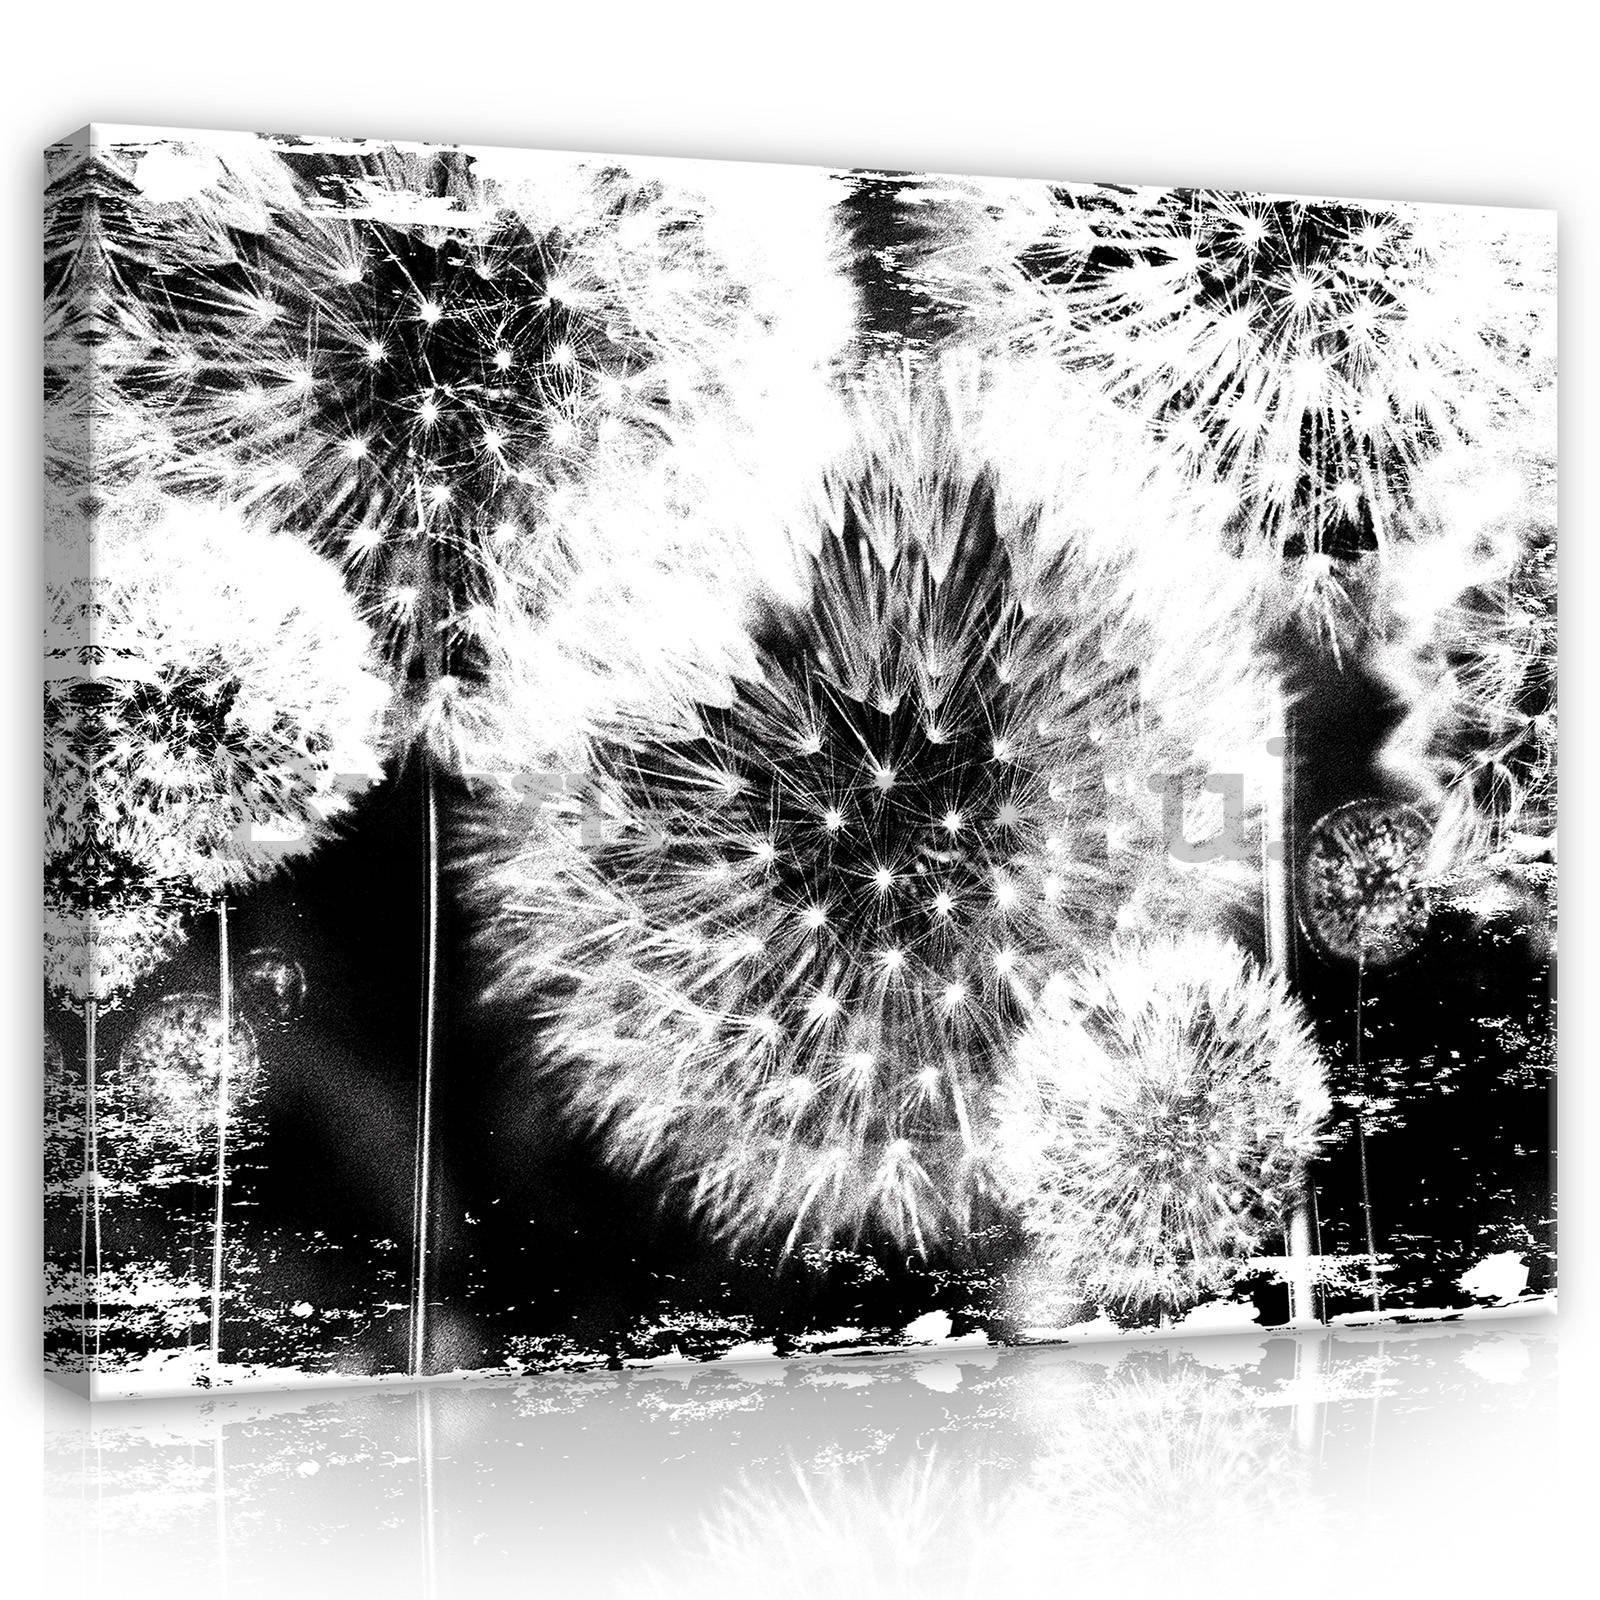 Painting on canvas: Dandelions (black and white) - 80x60 cm